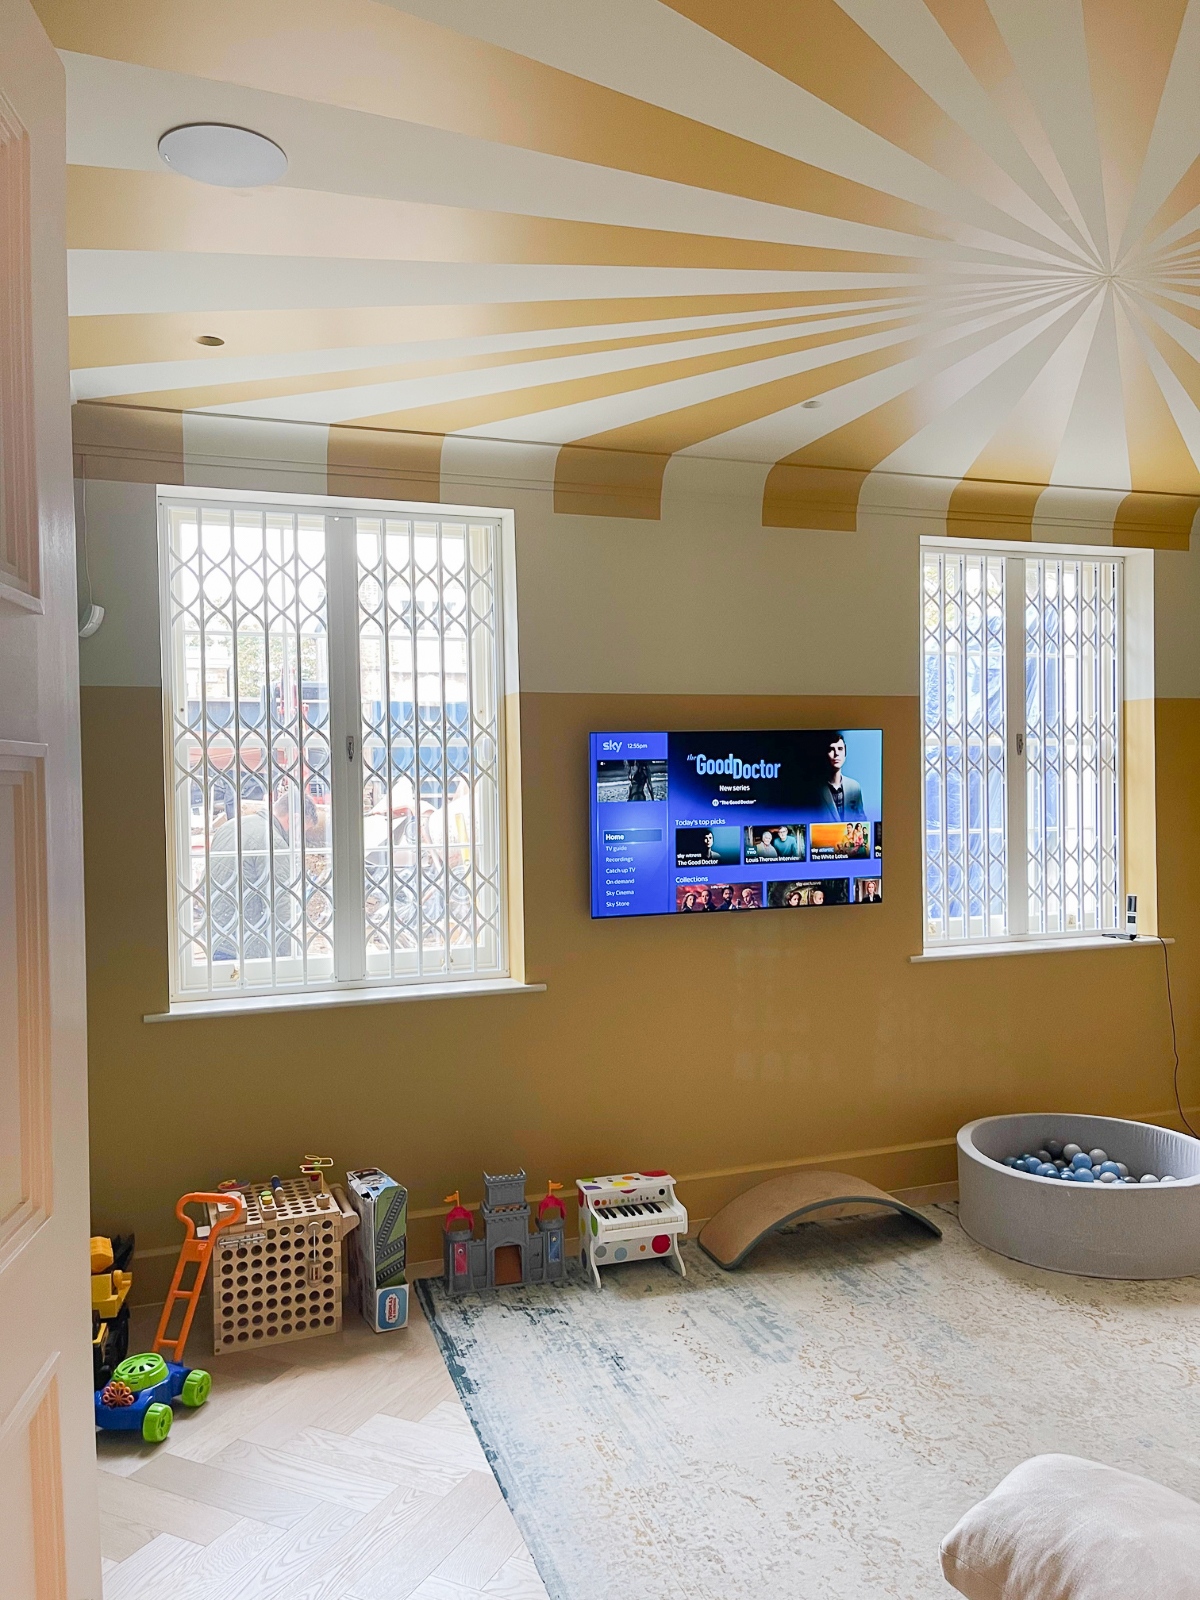 Playroom with circus print ceiling, OLED 4K TV and in-ceiling speakers